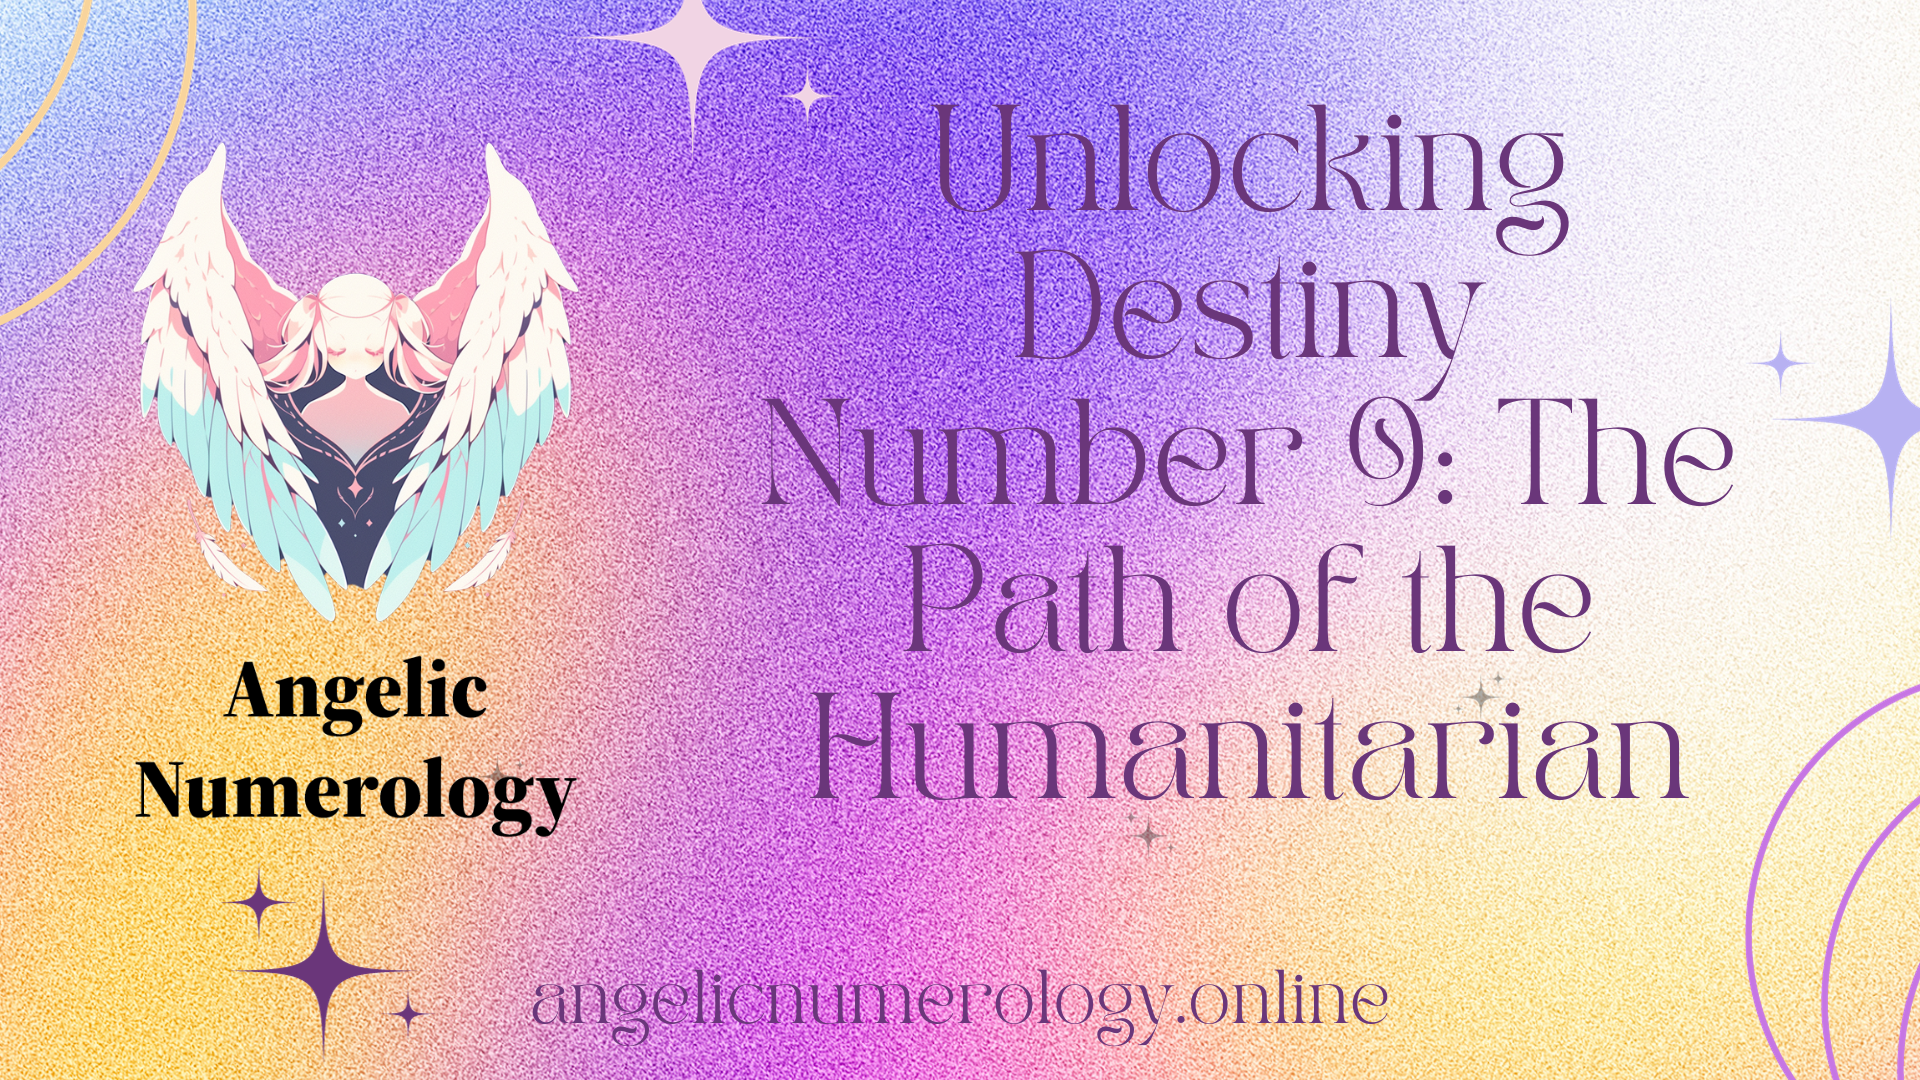 Unlocking Destiny Number 9: The Path of the Humanitarian